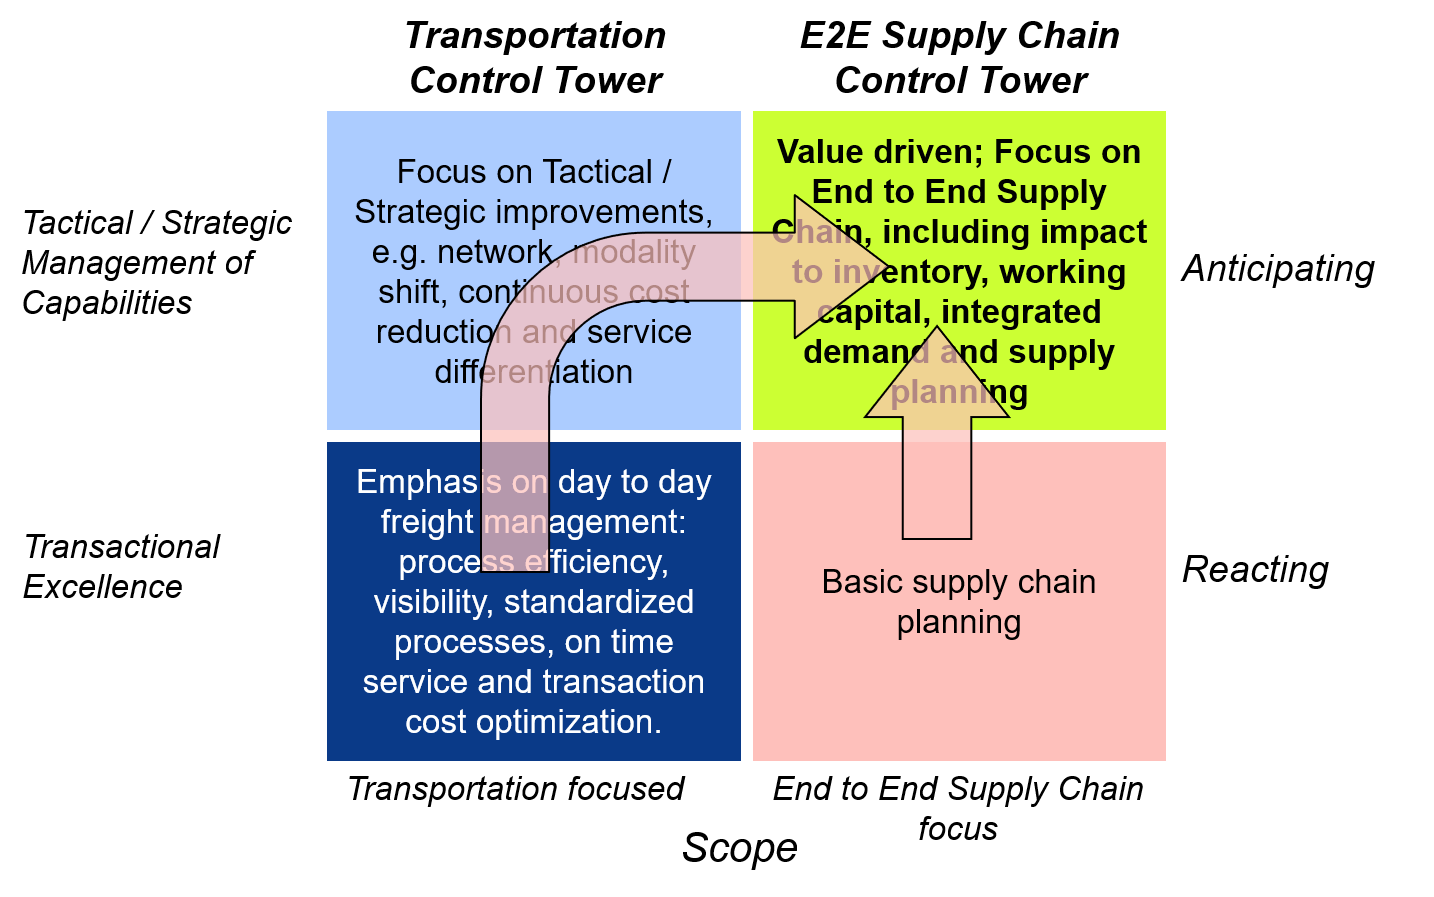 Freight management versus End to end supply chain control tower